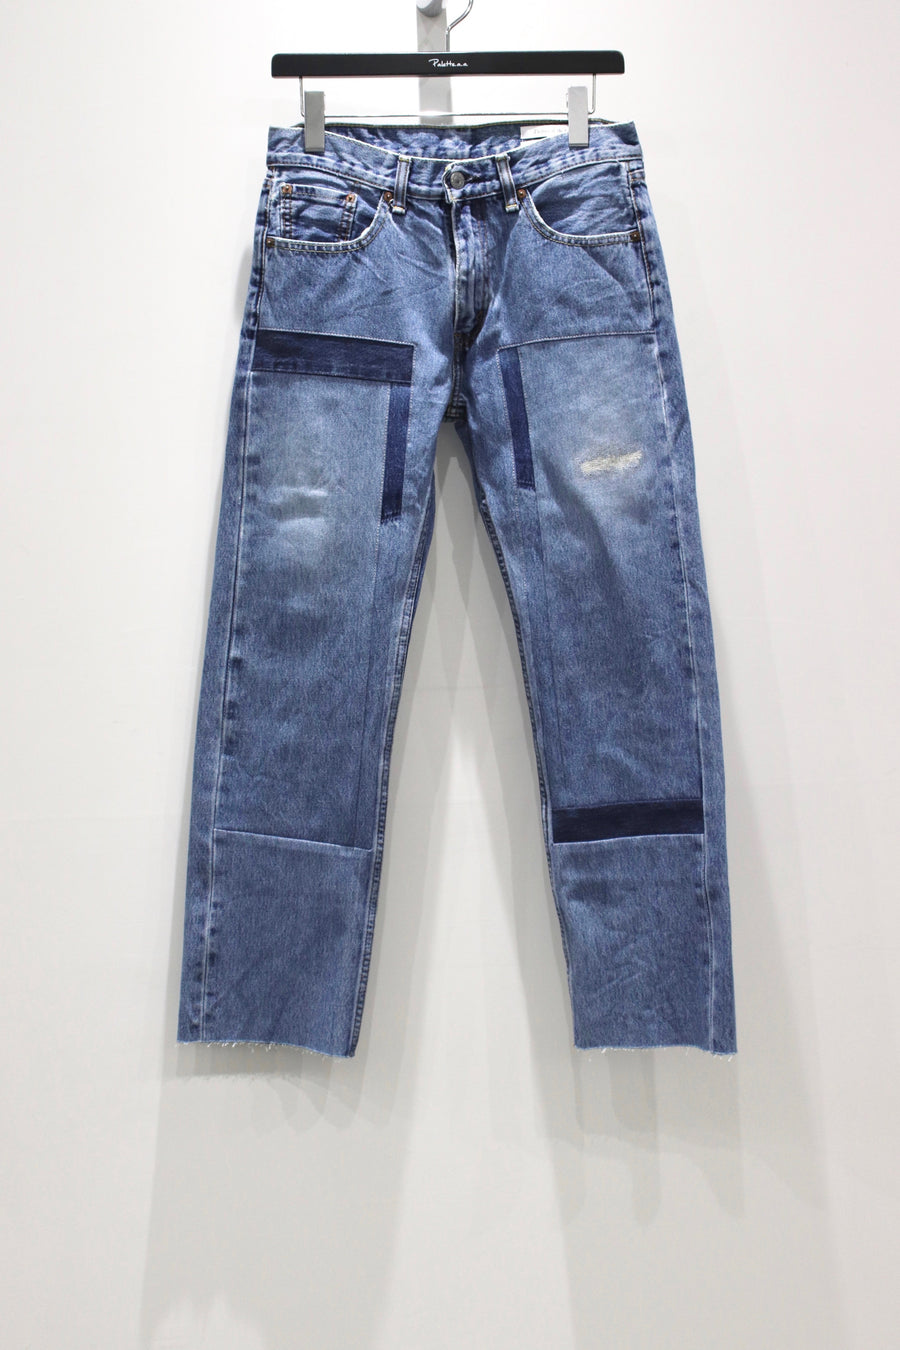 Children of the discordance  NY VINTAGE CUSTOM MADE PATCHDENIM